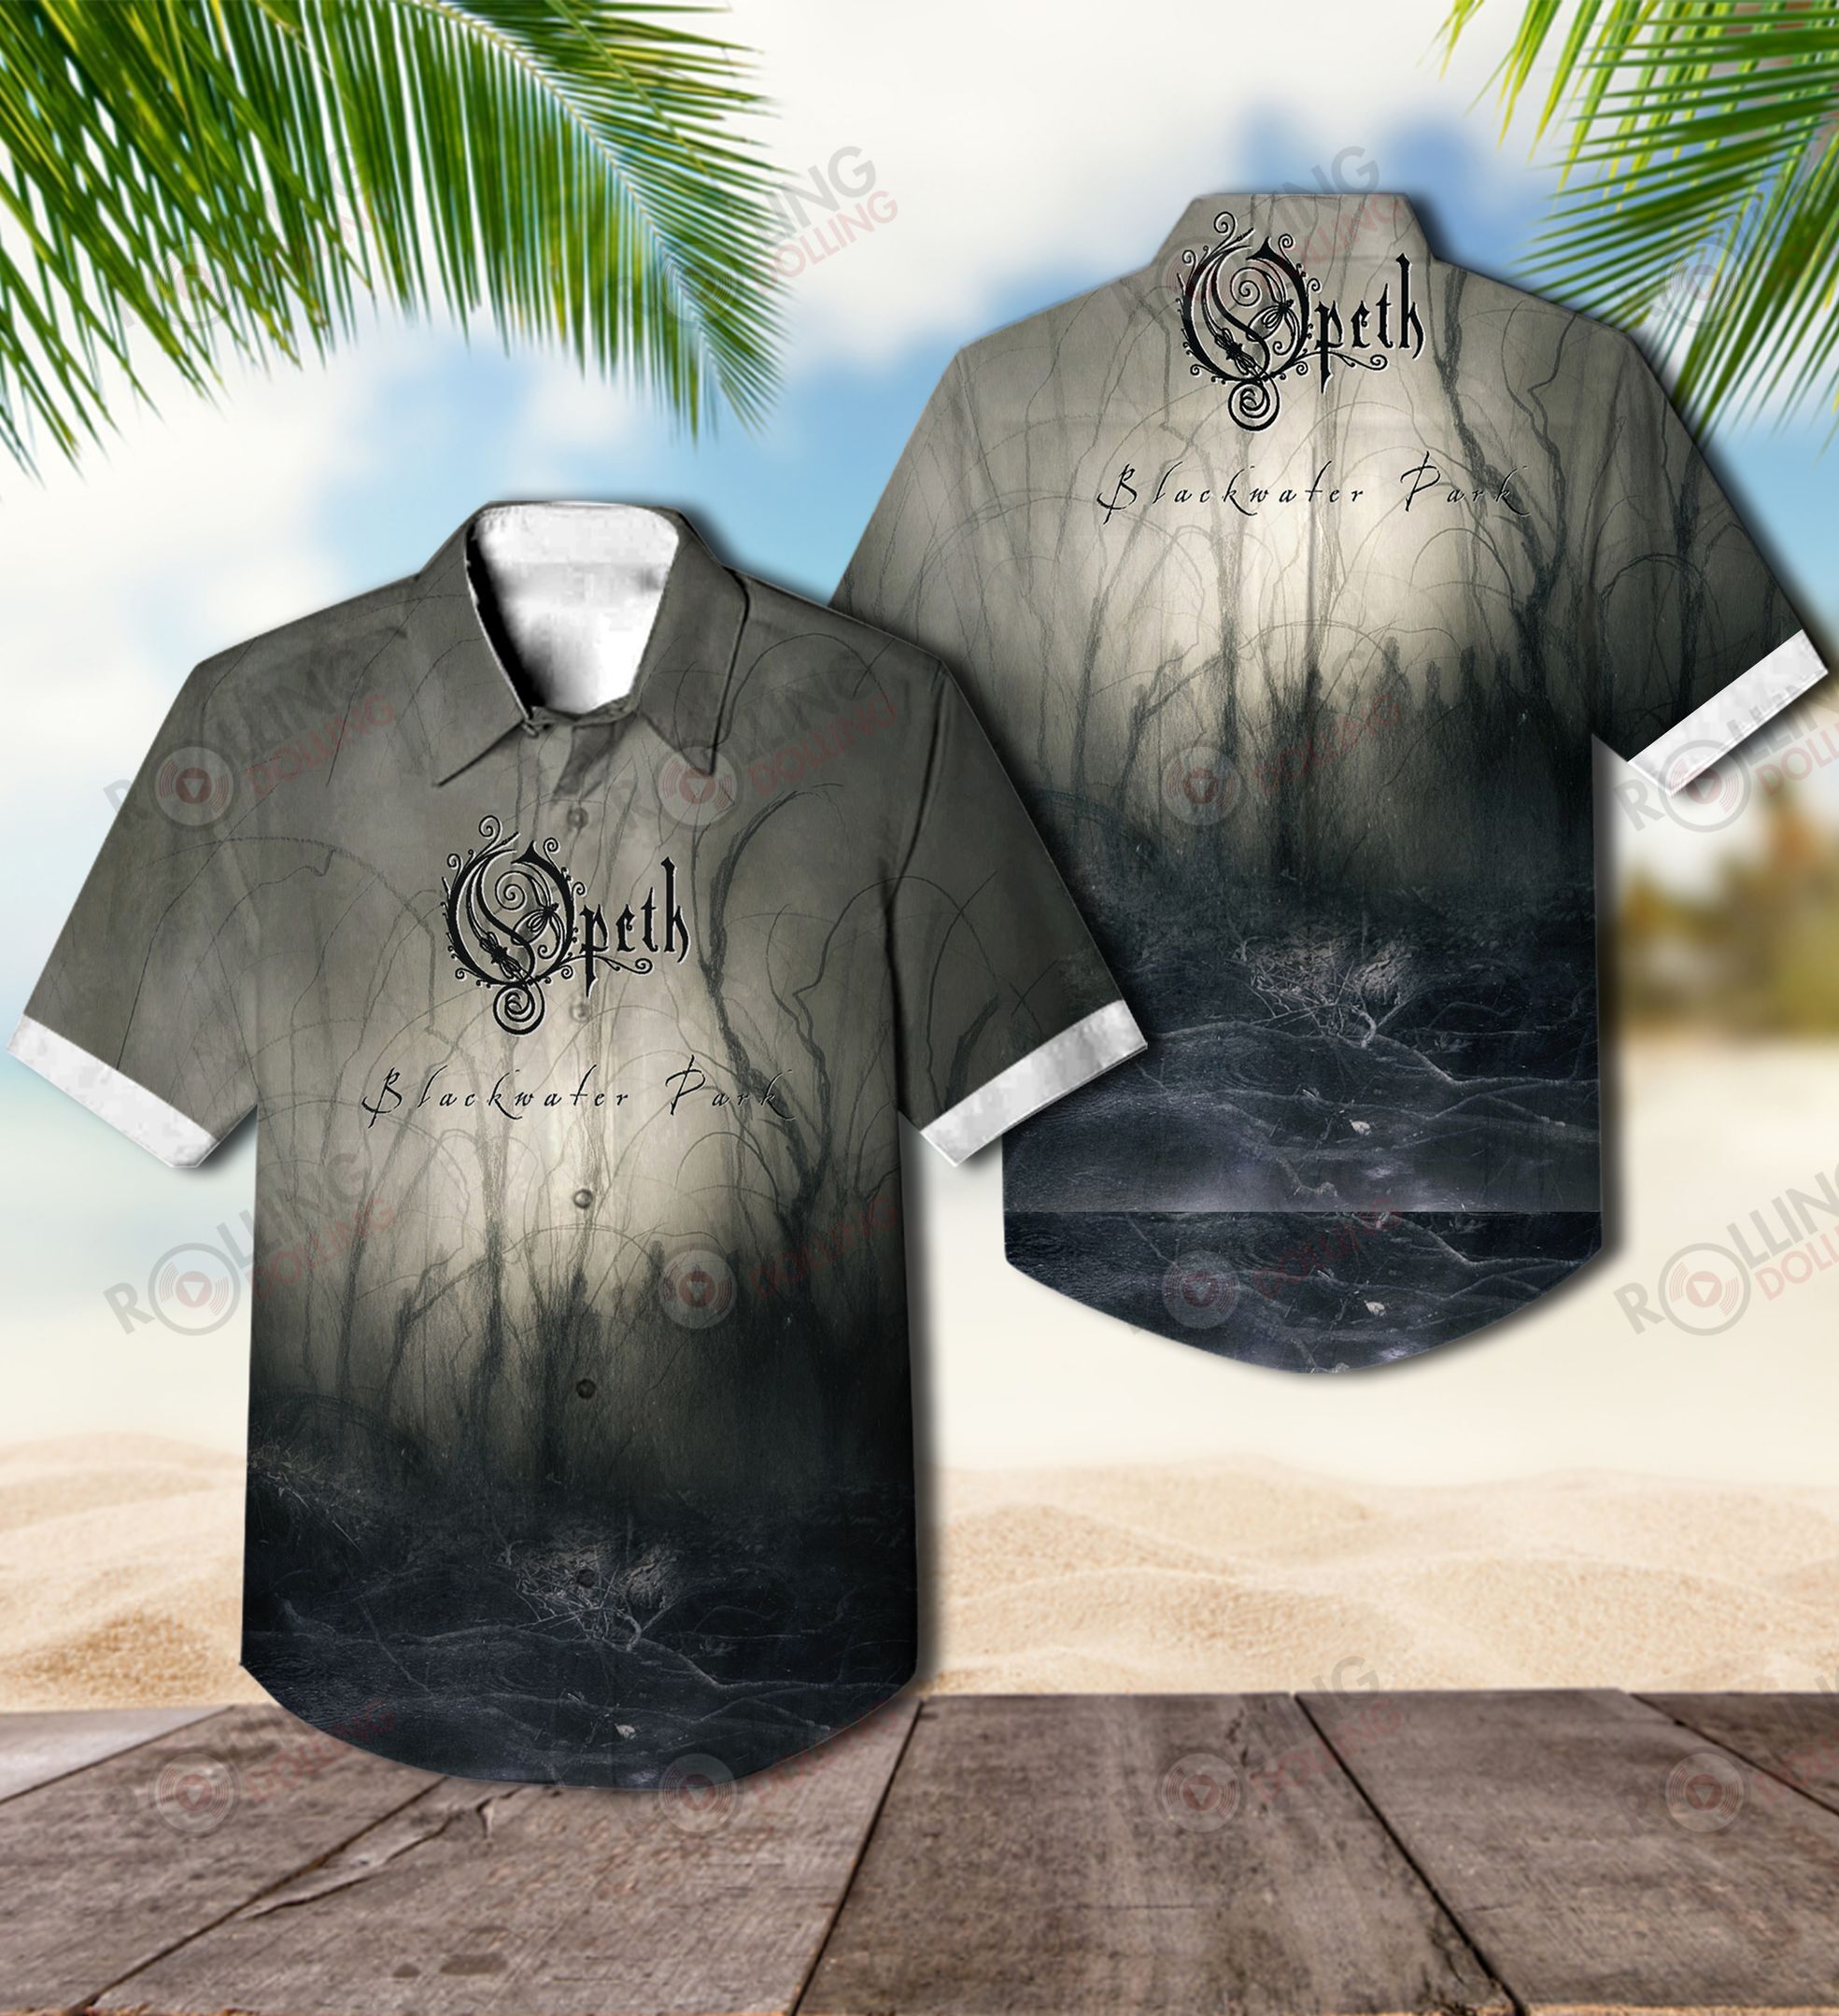 Now you can show off your love of all things band with this Hawaiian Shirt 41